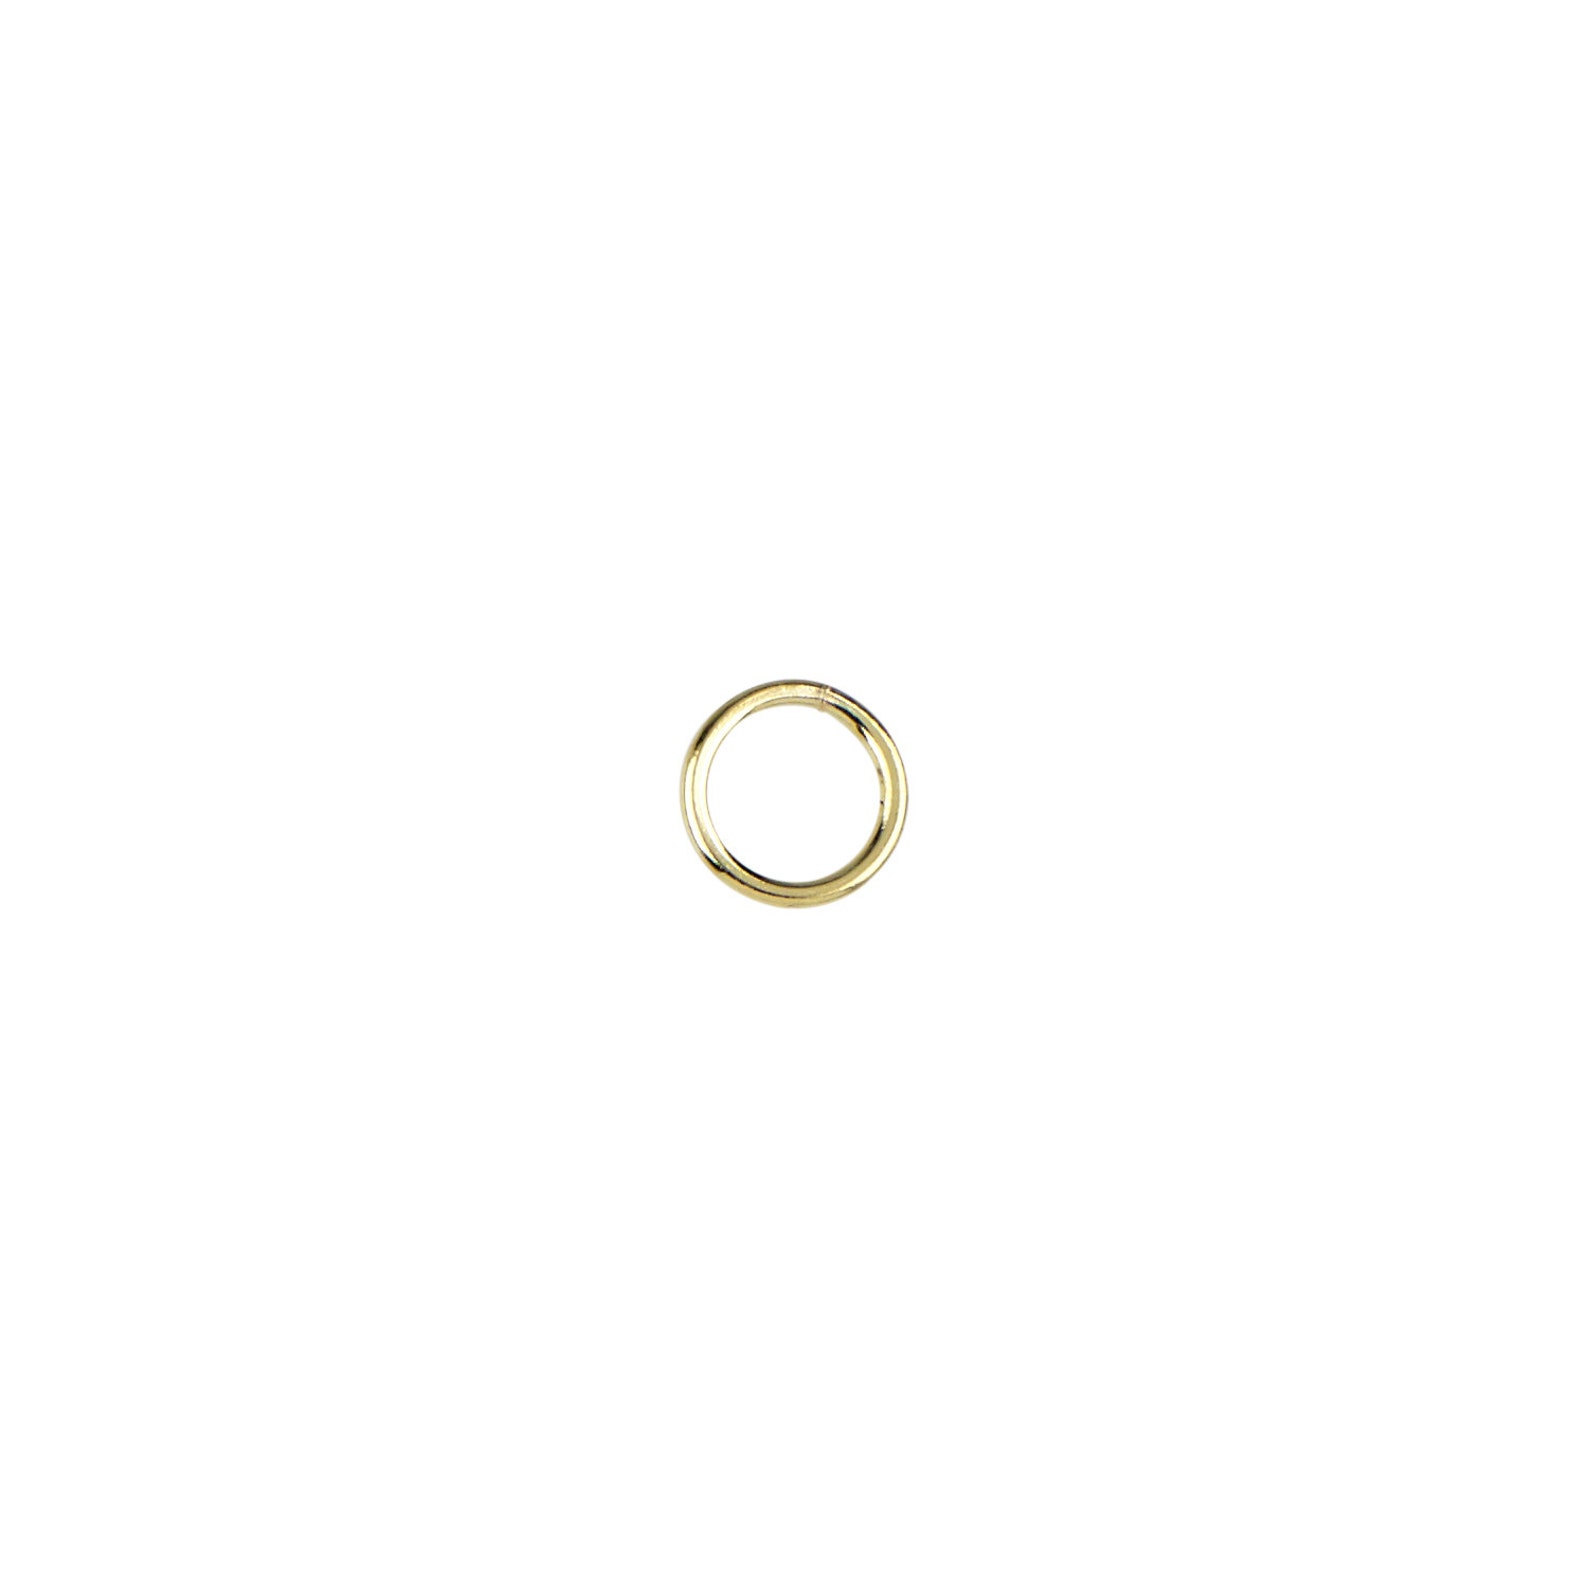 8mm Heavy Closed 18 Guage Jump Ring Gold Filled GF GF28318 - Etsy